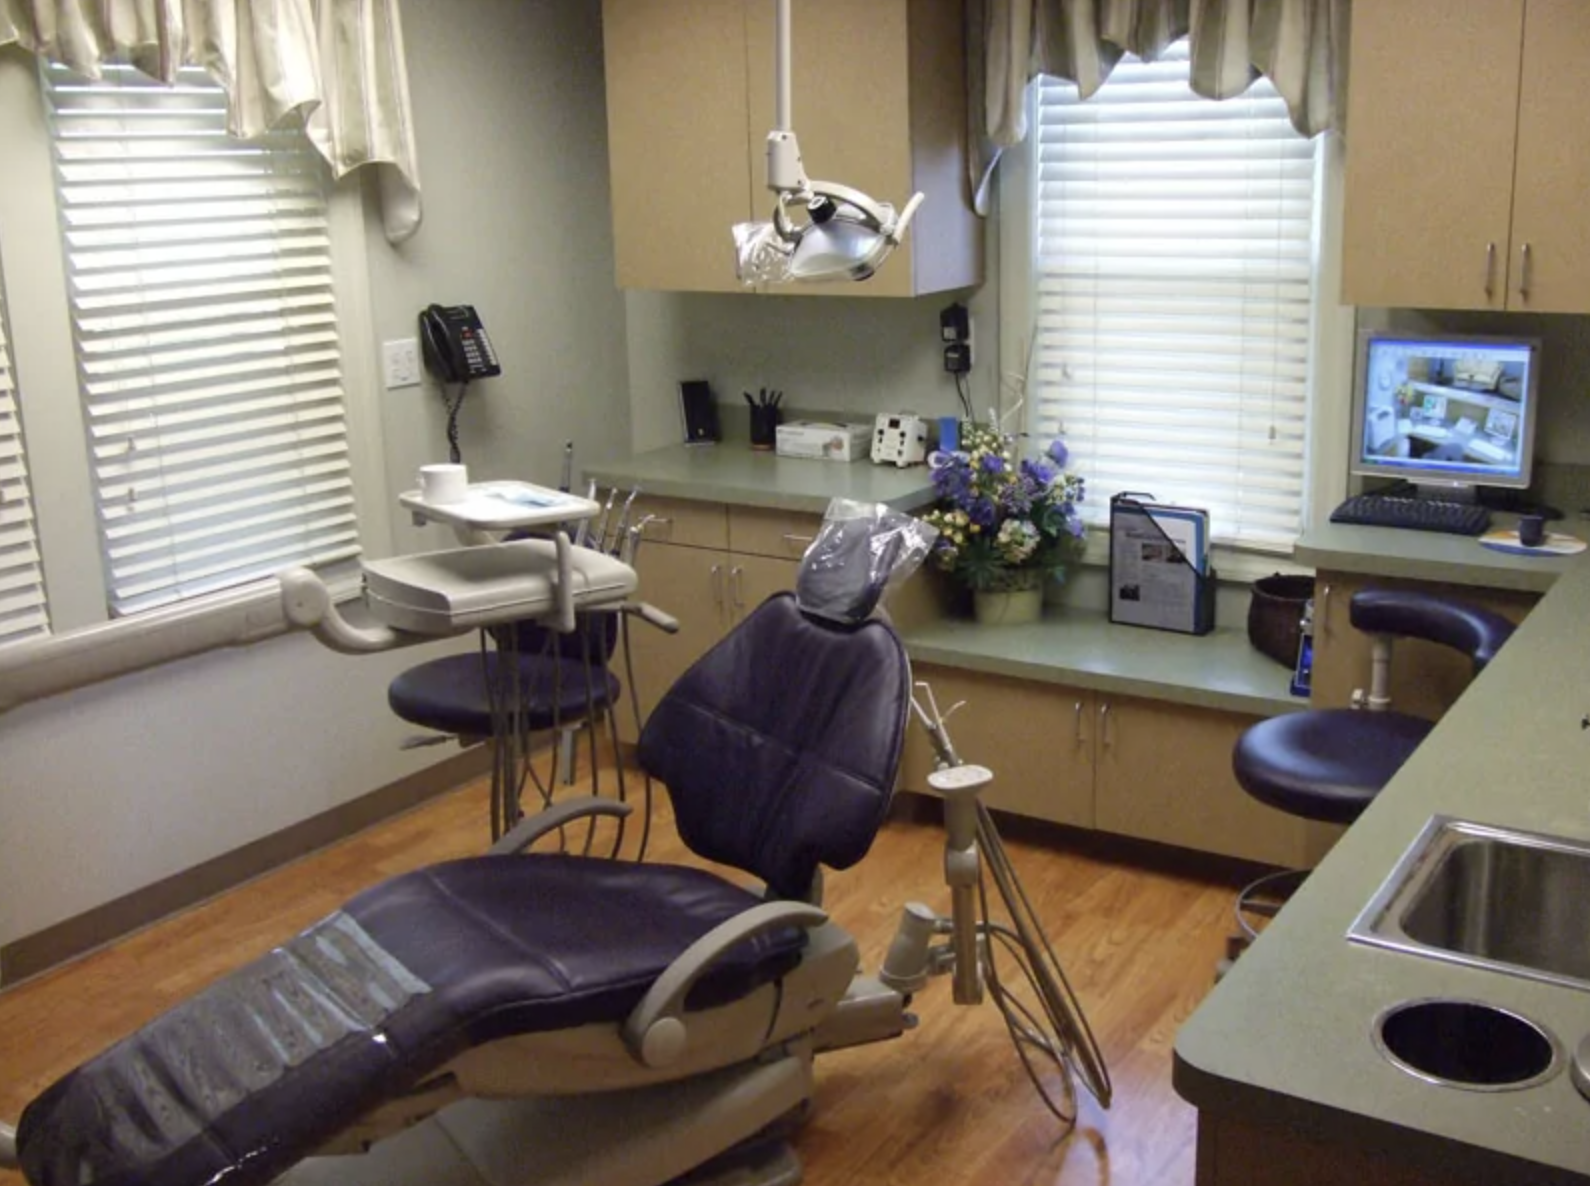 Sophisticated Smiles Exam Room - Your Dental Home in Flemington, NJ Specializing in Family Dentistry Sophisticated Smiles Flemington (908)806-4333